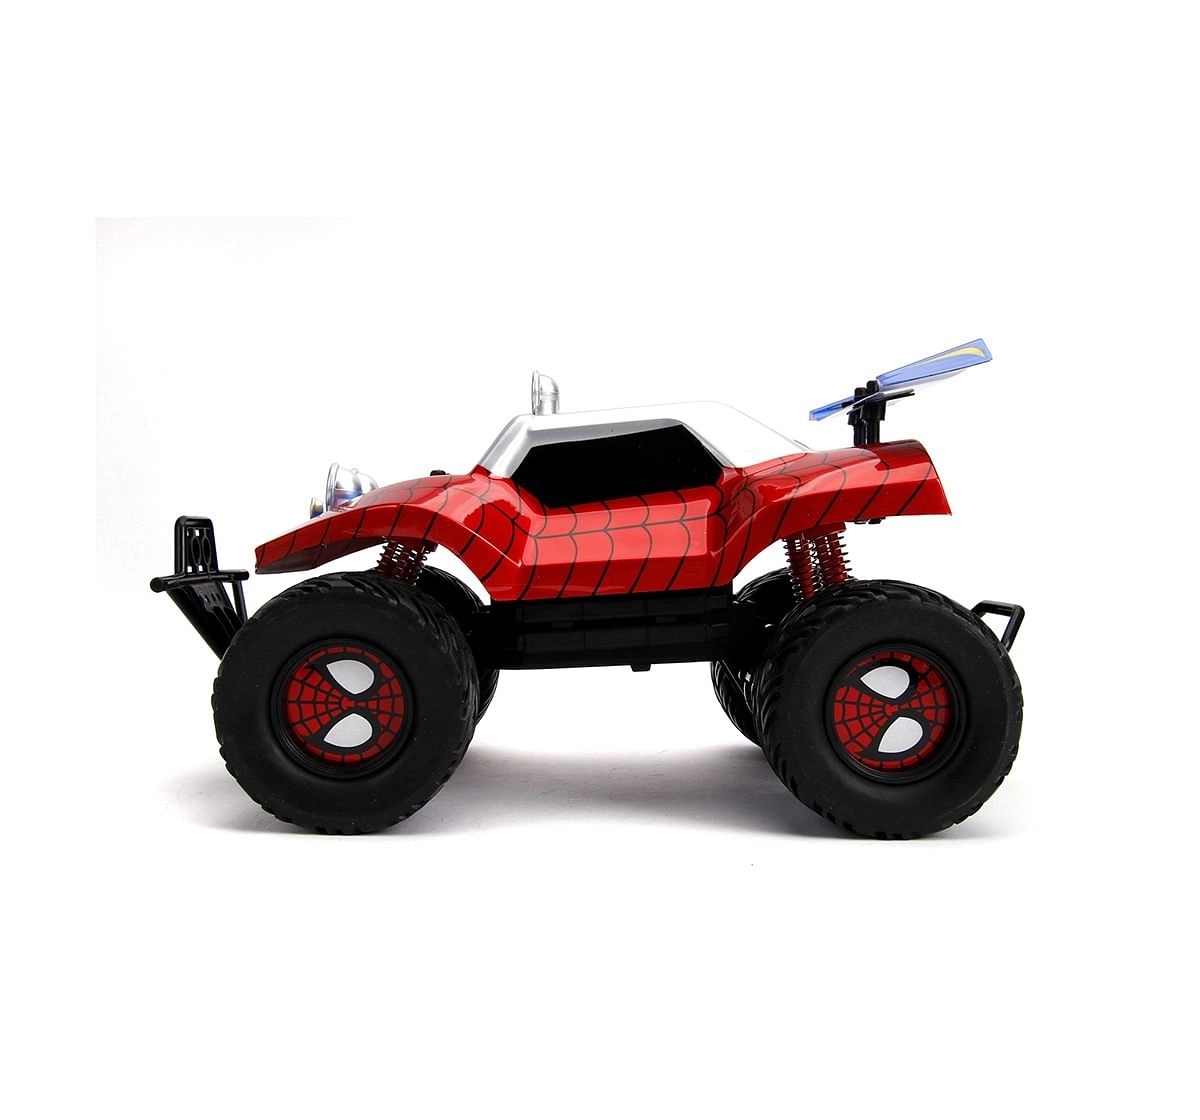 Jada Marvel Spider-Man RC Buggy 1:14 Remote Control Toys for Kids age 6Y+ 